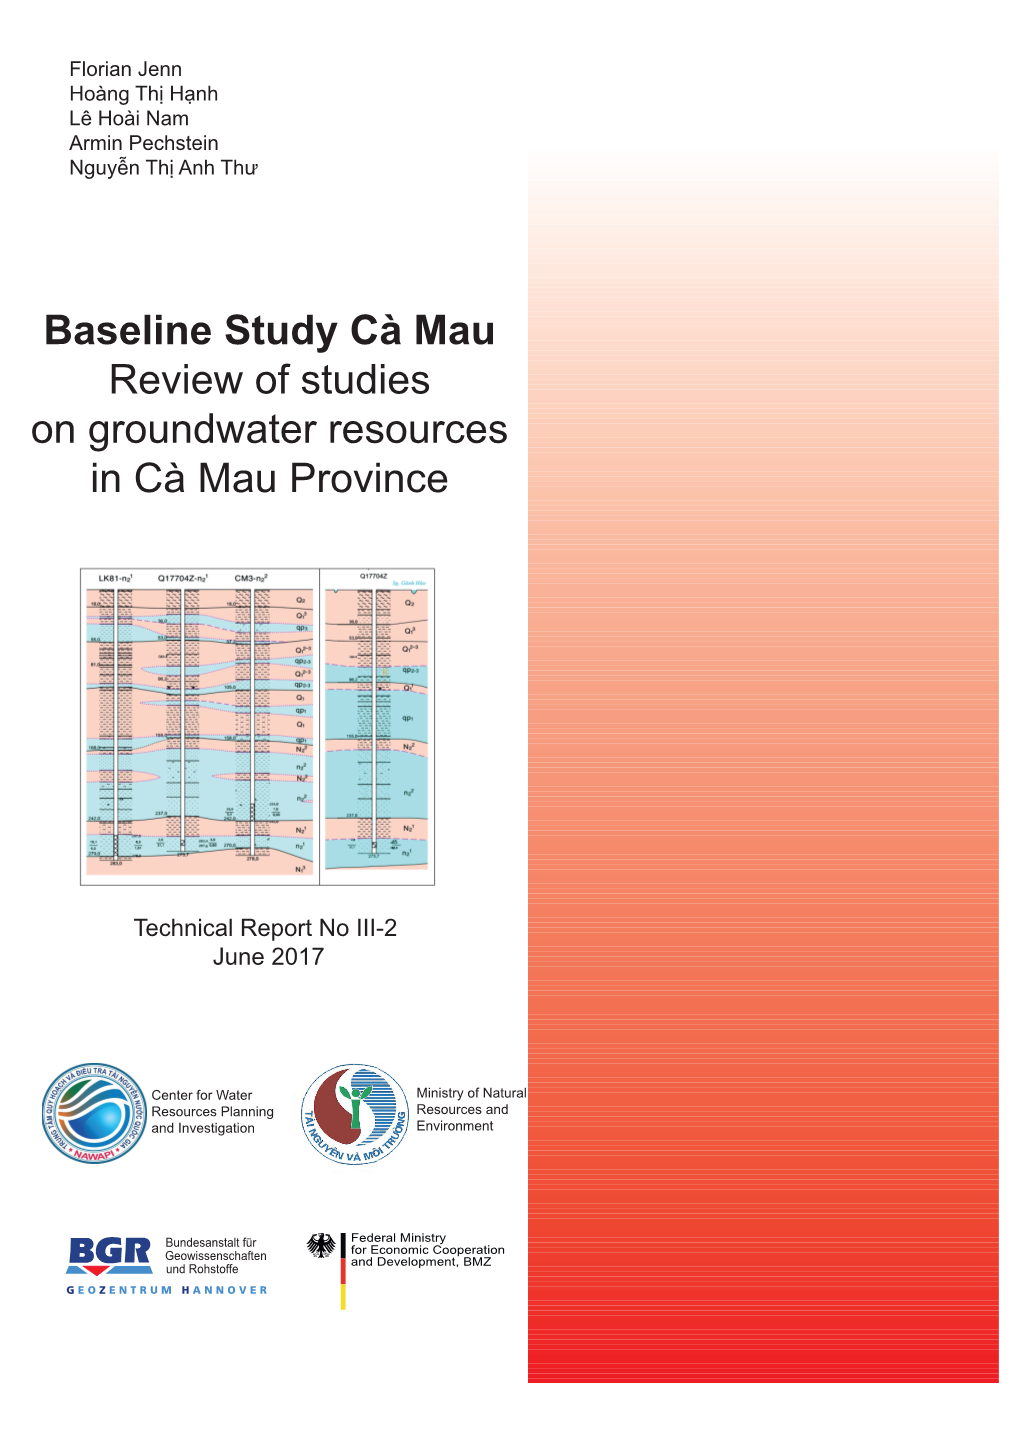 Review of Studies on Groundwater Resources in Cà Mau Province